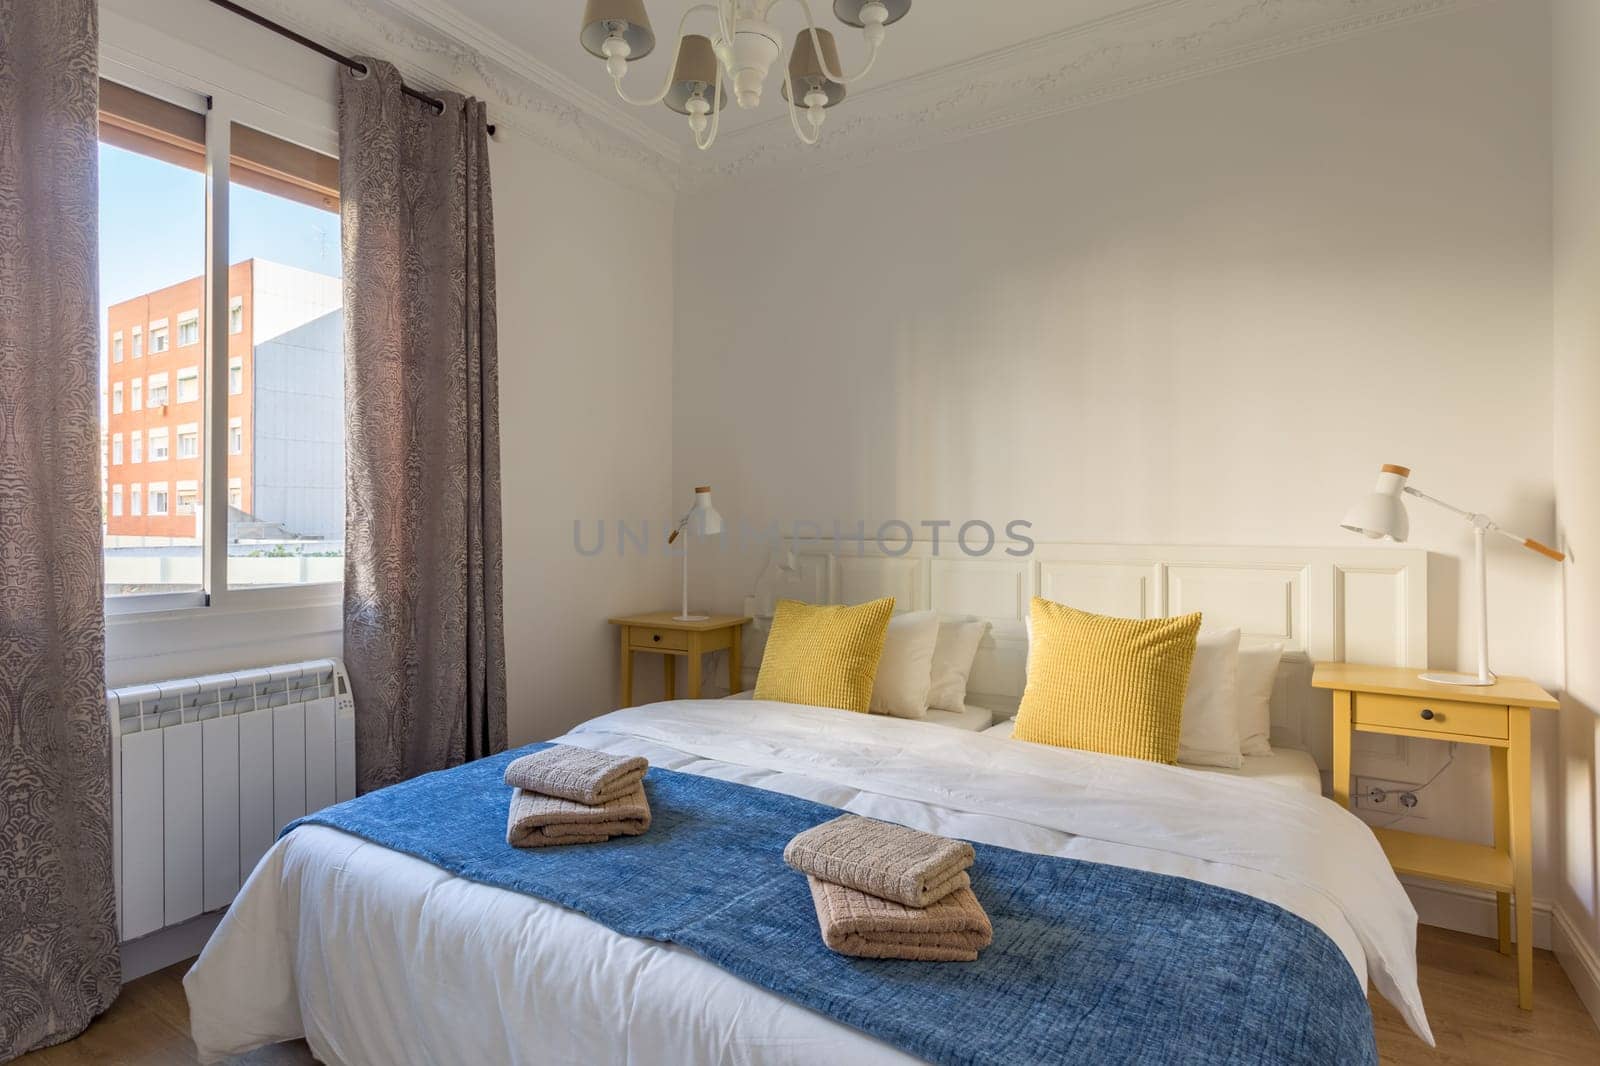 Interior of touristic bedroom with window. Yellow pillows on bed with towels. An apartment ready for booking by tourists.